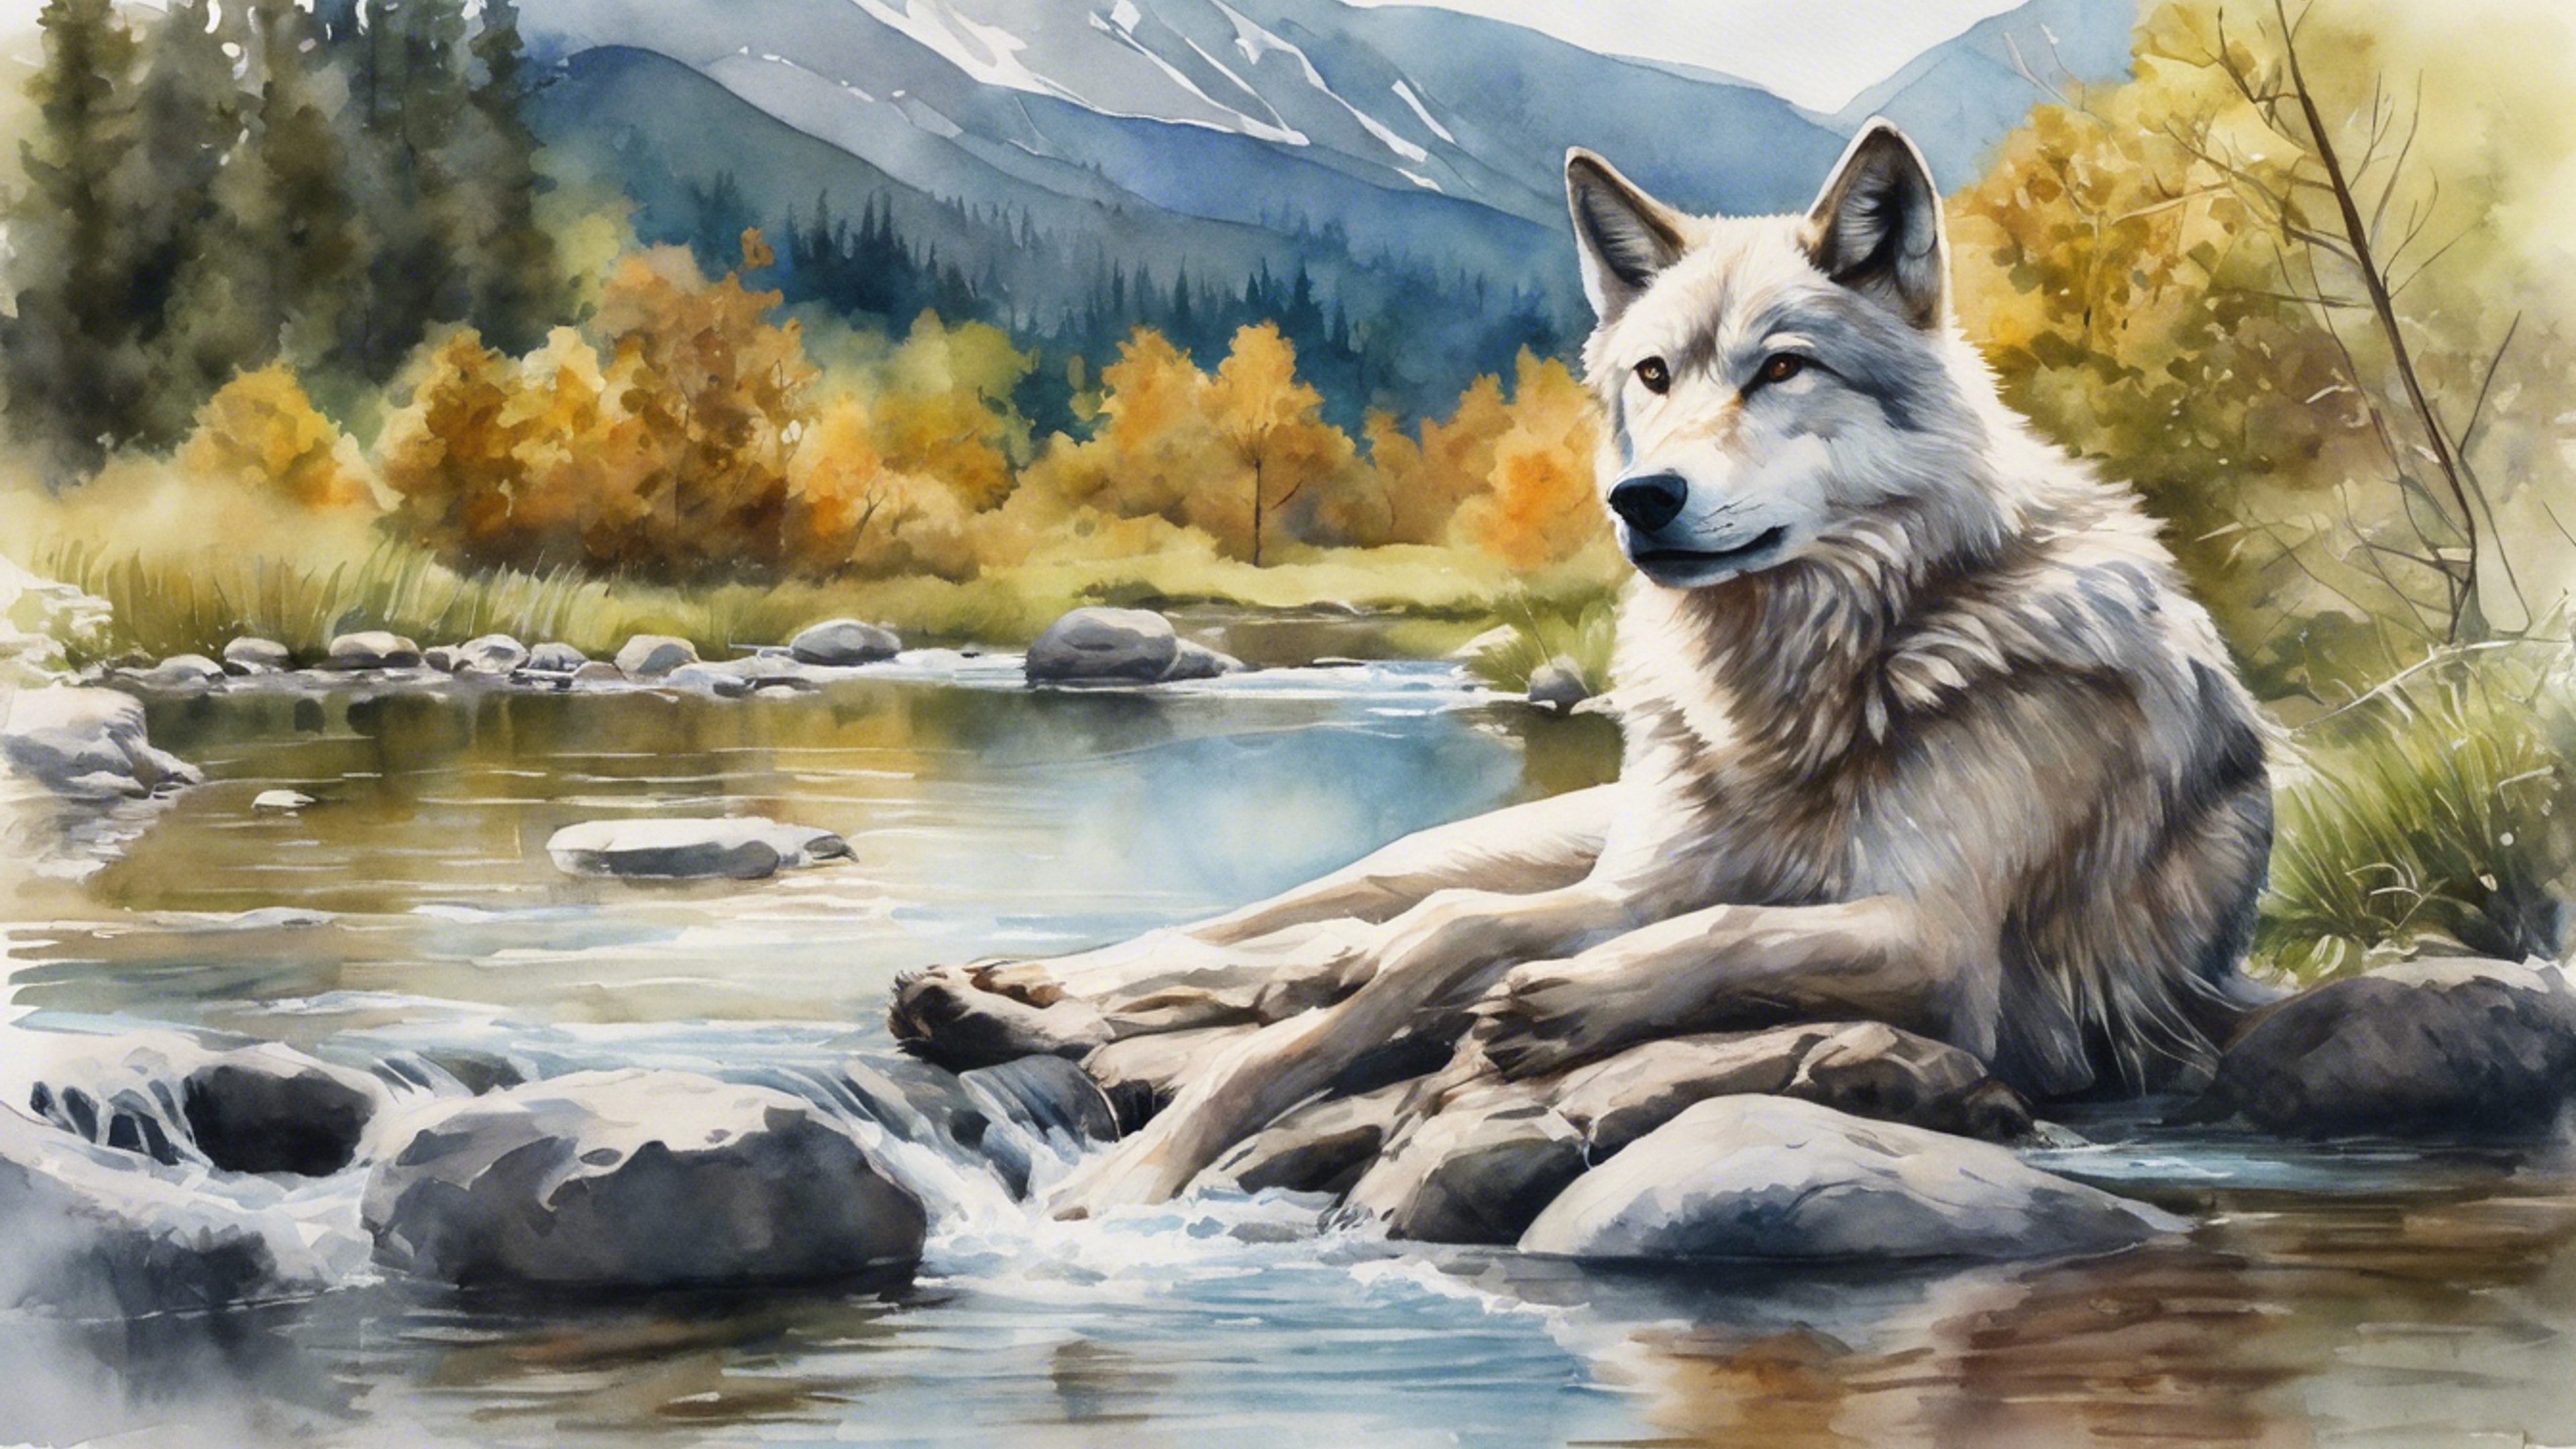 A watercolor painting of a tranquil scene where a wolf is laying down peacefully by a clear mountain stream.壁紙[5513c824108343fb9828]